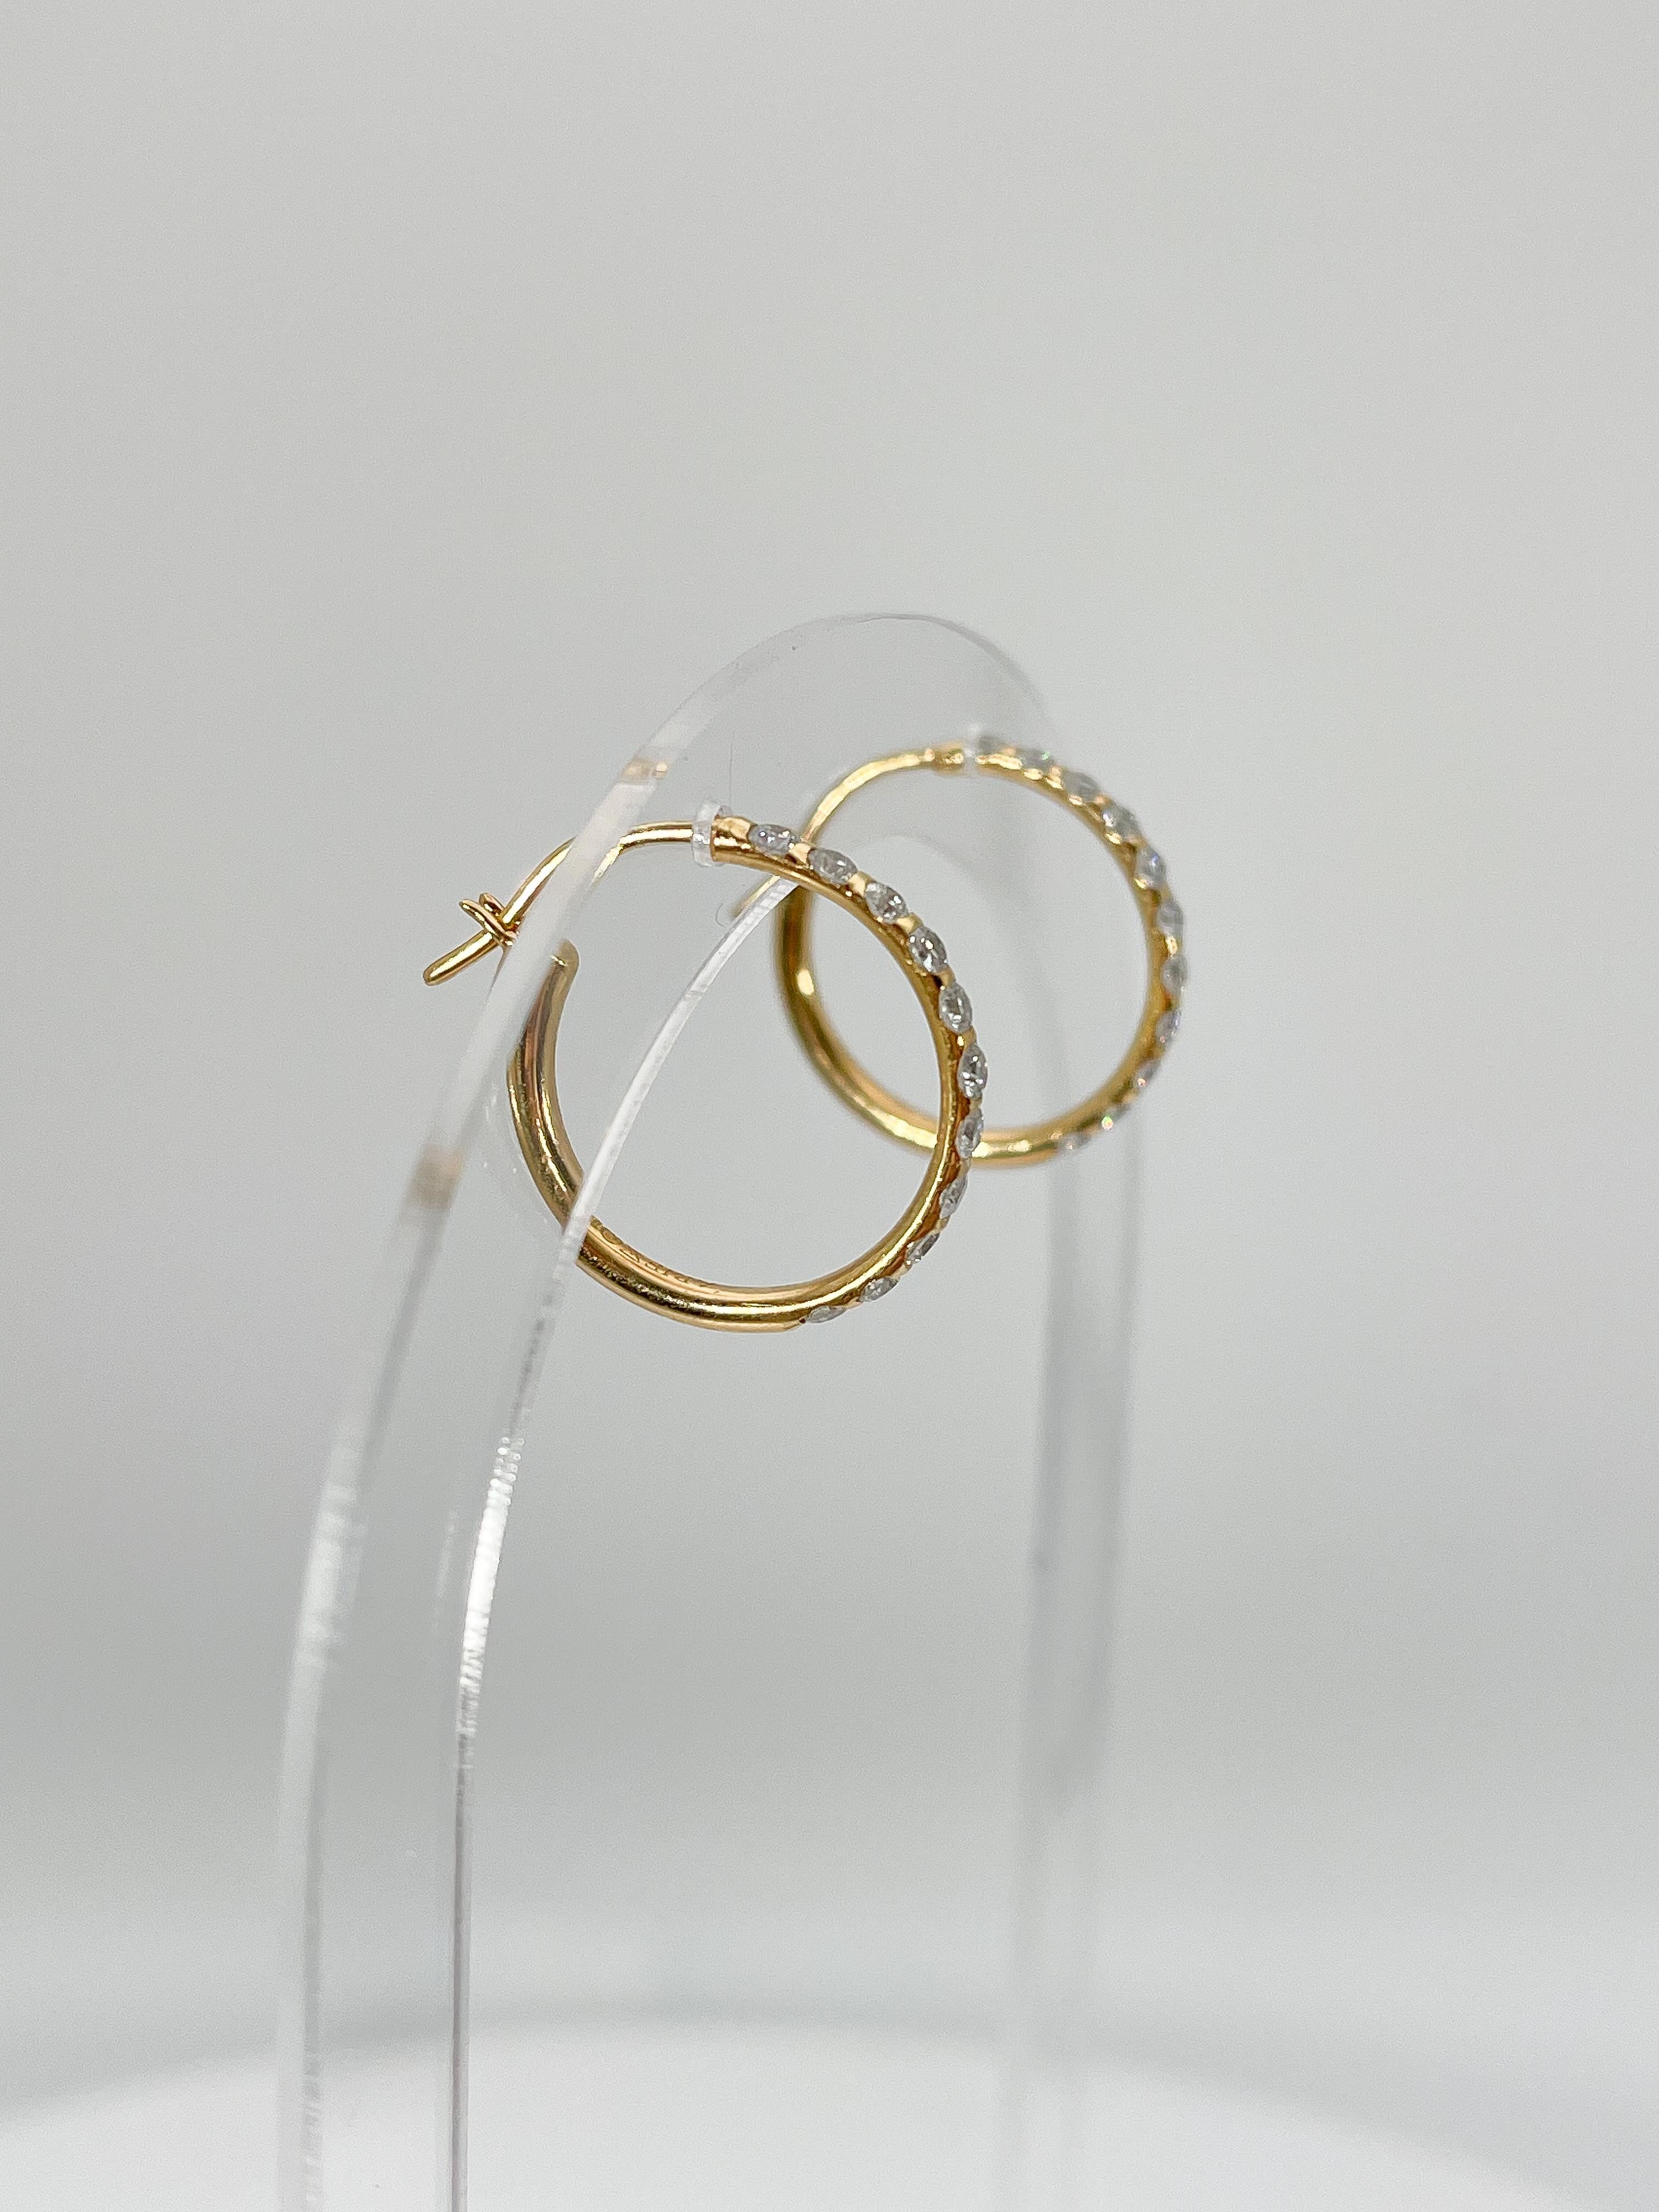 14K Yellow Gold .75 CTW Diamond Hoop Earrings In Excellent Condition For Sale In Stuart, FL